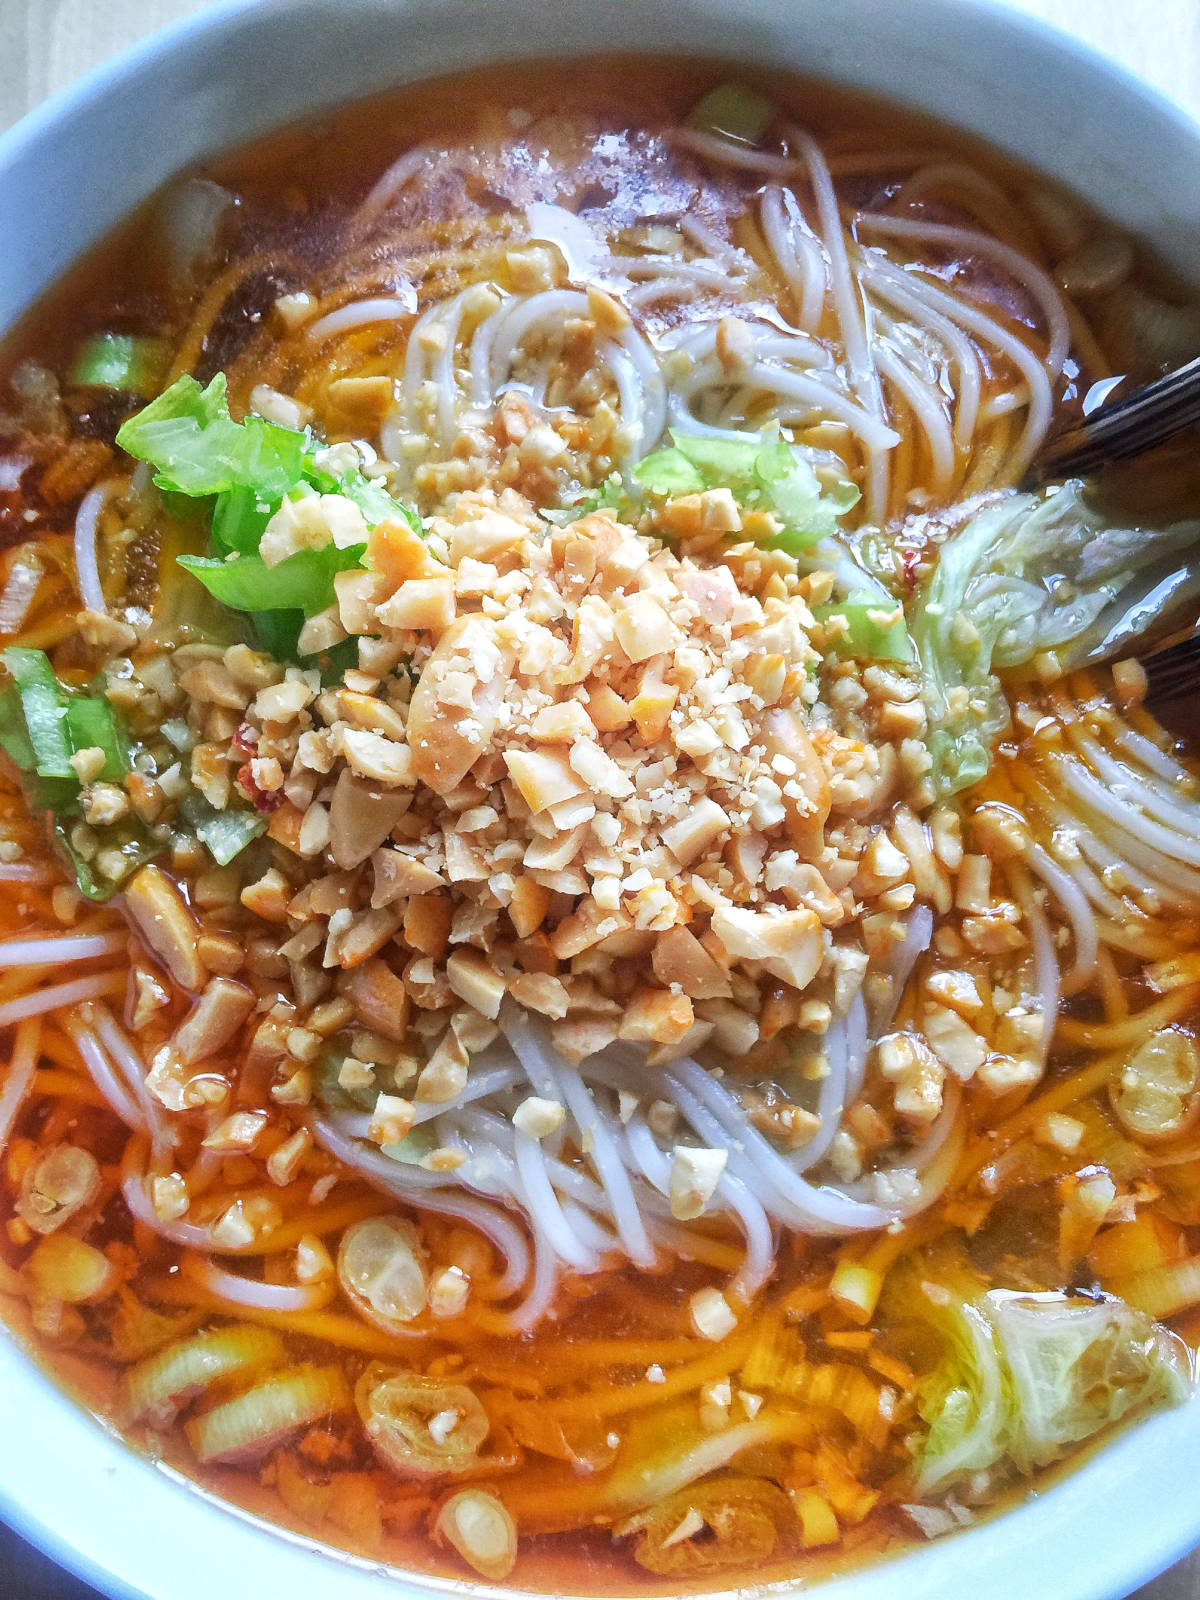 A close-up view of a bowl of Chongqing spicy noodles topped with chopped peanuts with chopsticks on the side.